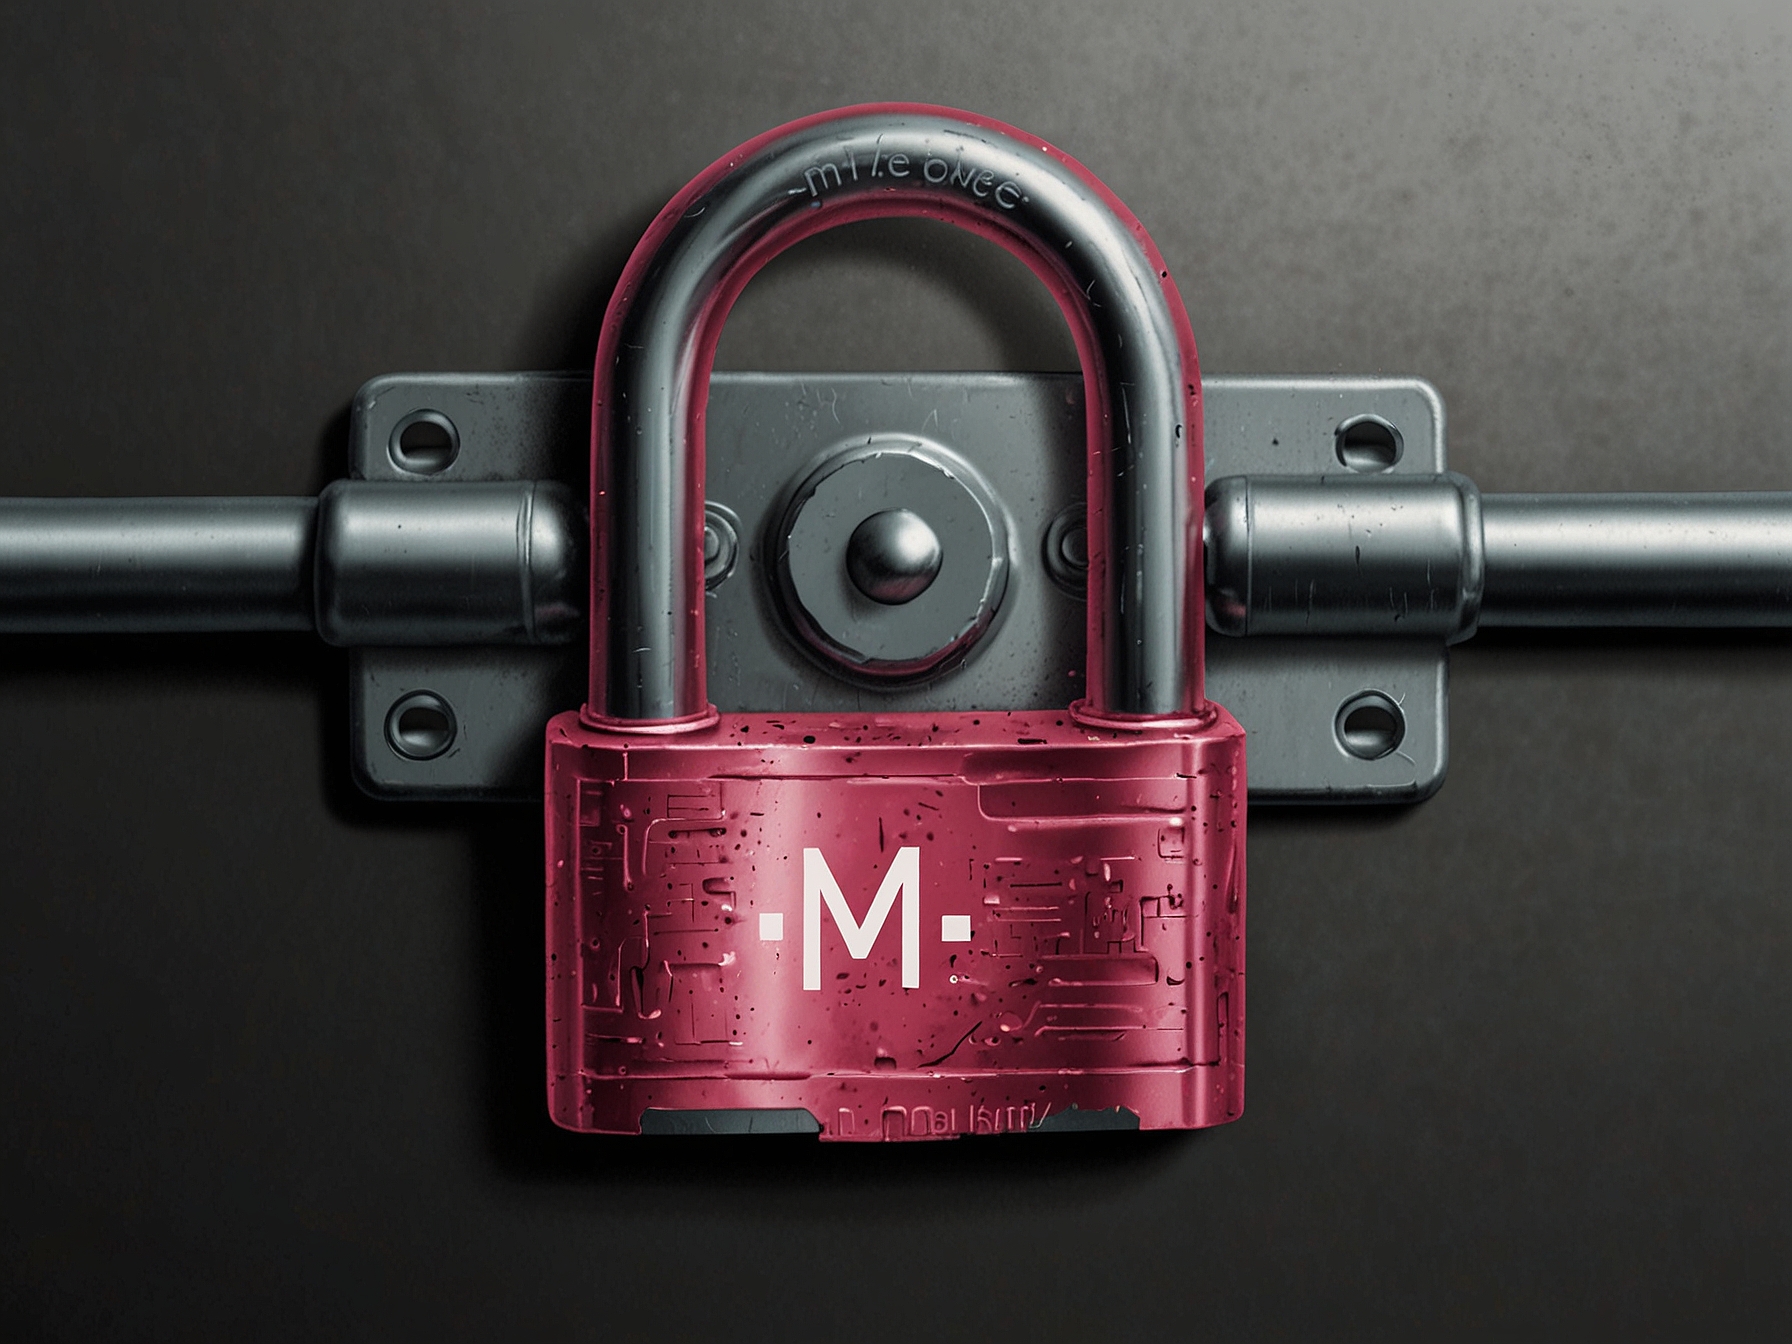 An illustration showing a magnified view of a security lock overlaying T-Mobile's logo. This visually represents the company's claim that its security measures remain uncompromised.